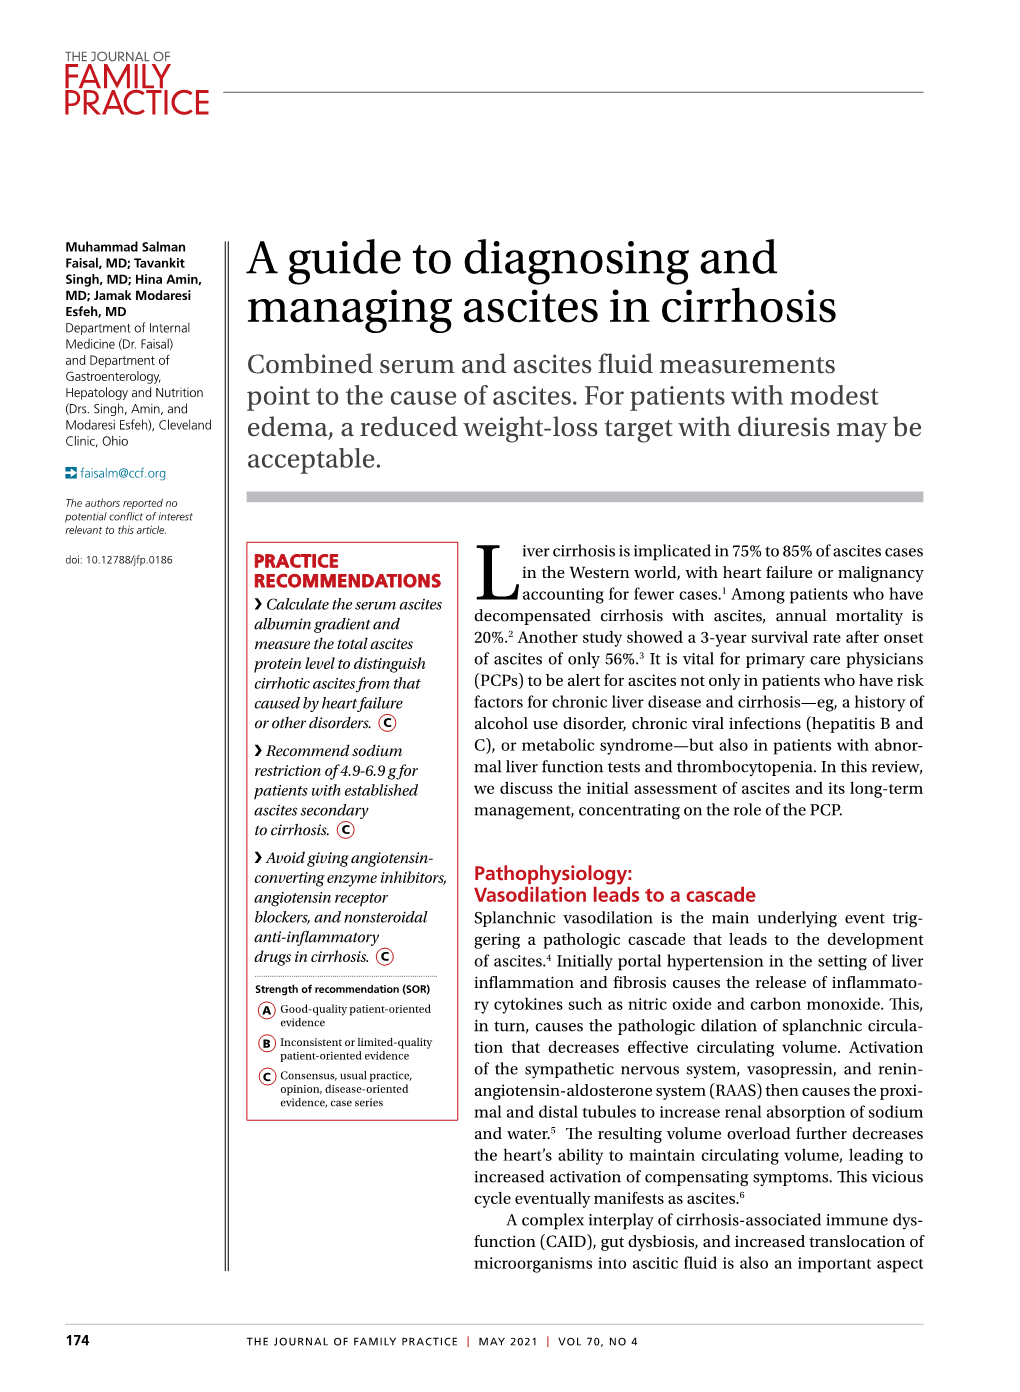 A Guide to Diagnosing and Managing Ascites in Cirrhosis